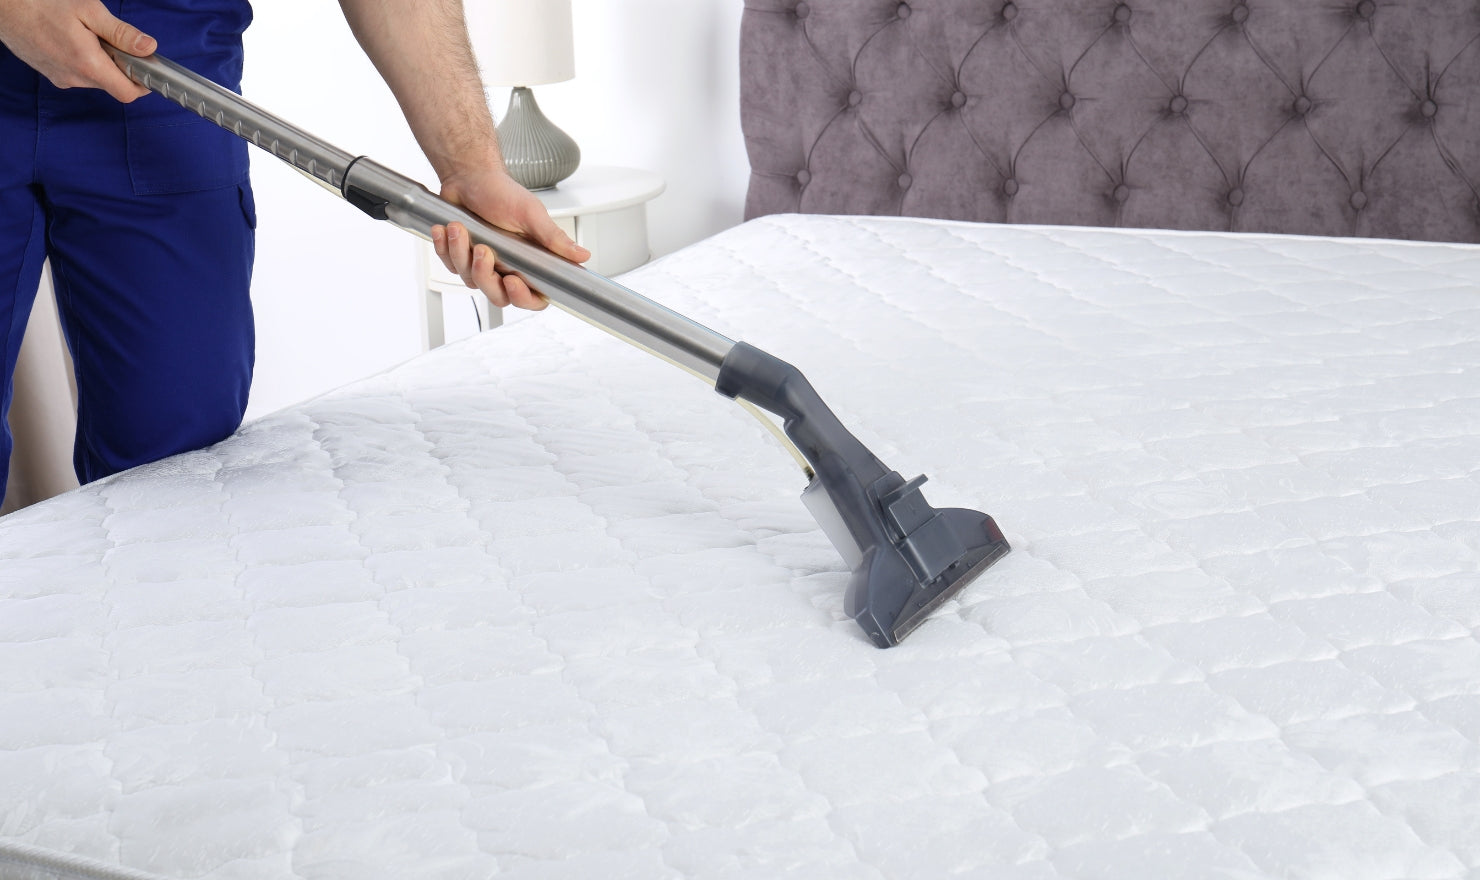 Clean the mattress and topper regularly